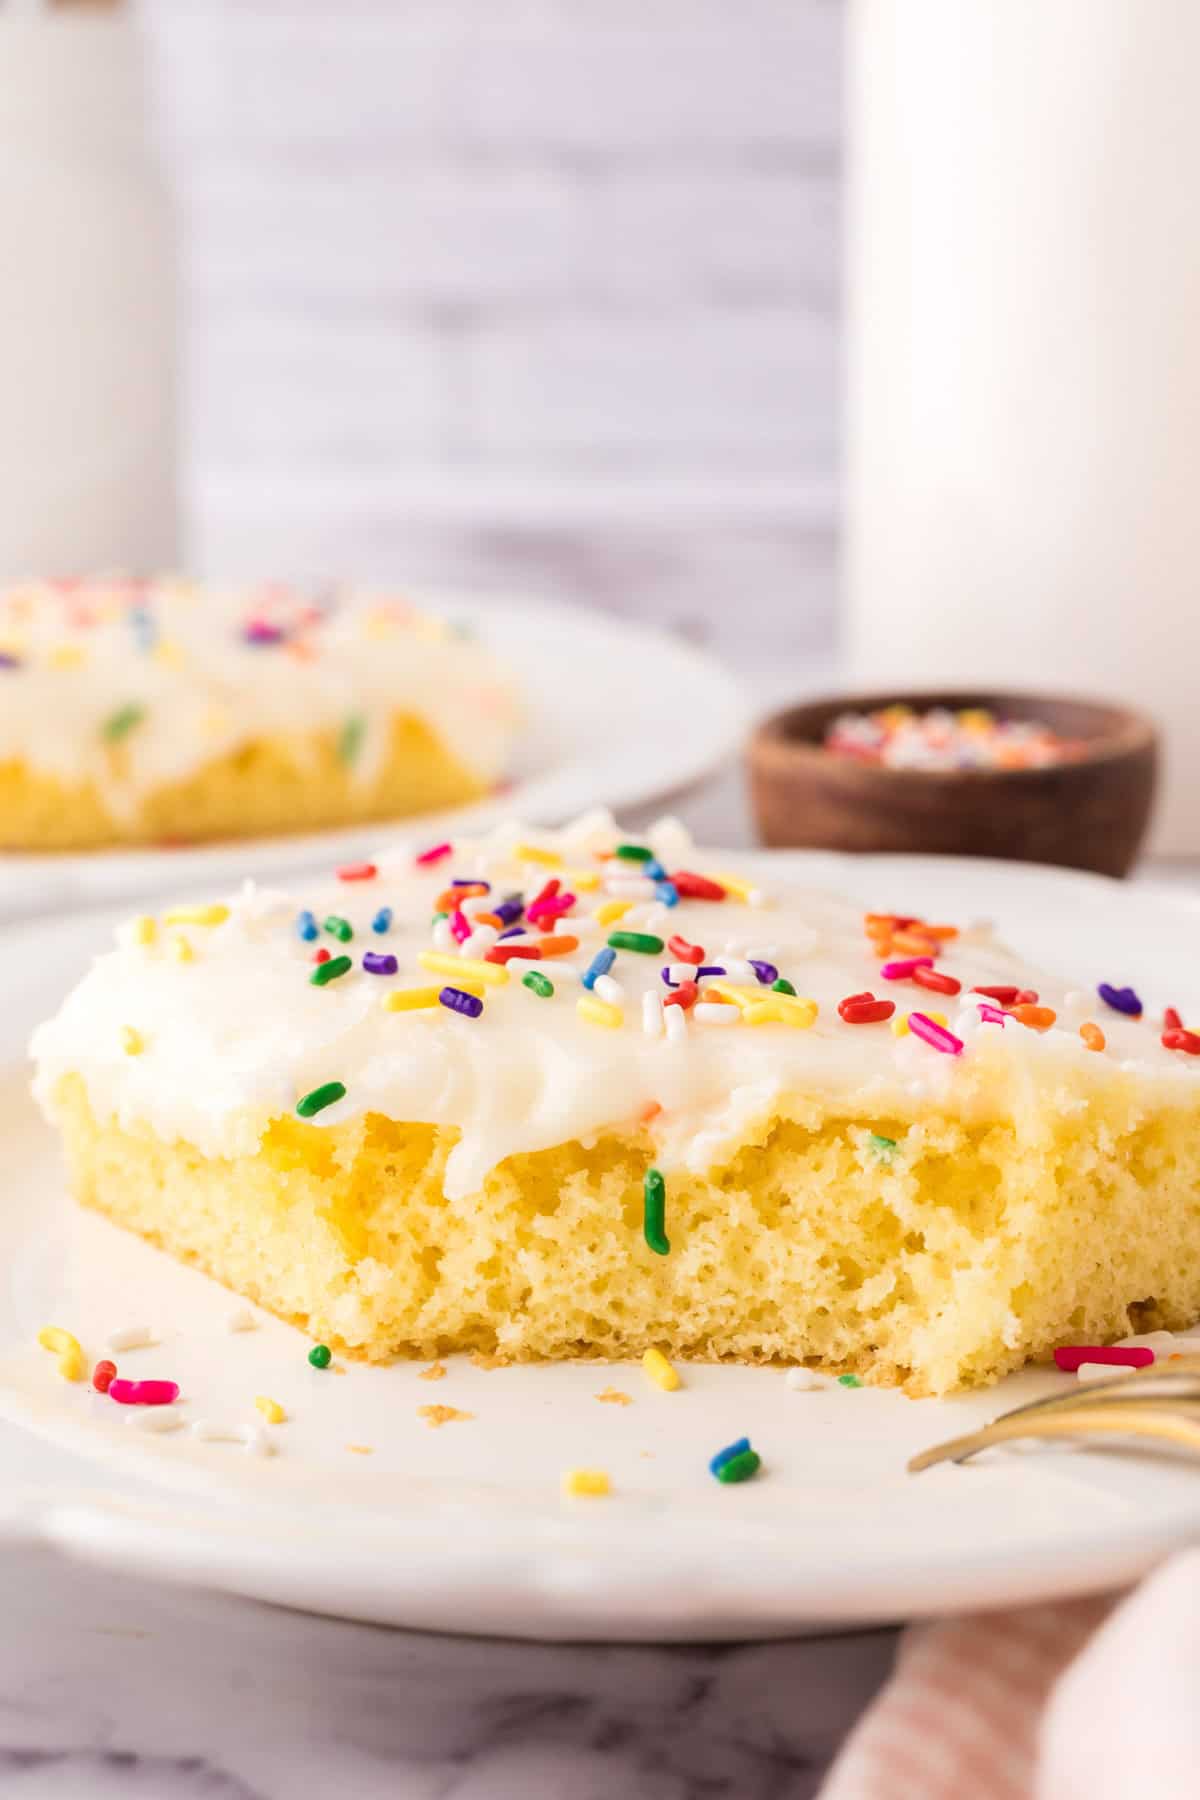 vanilla sheet cake with rainbow sprinkles and a bite taken out.